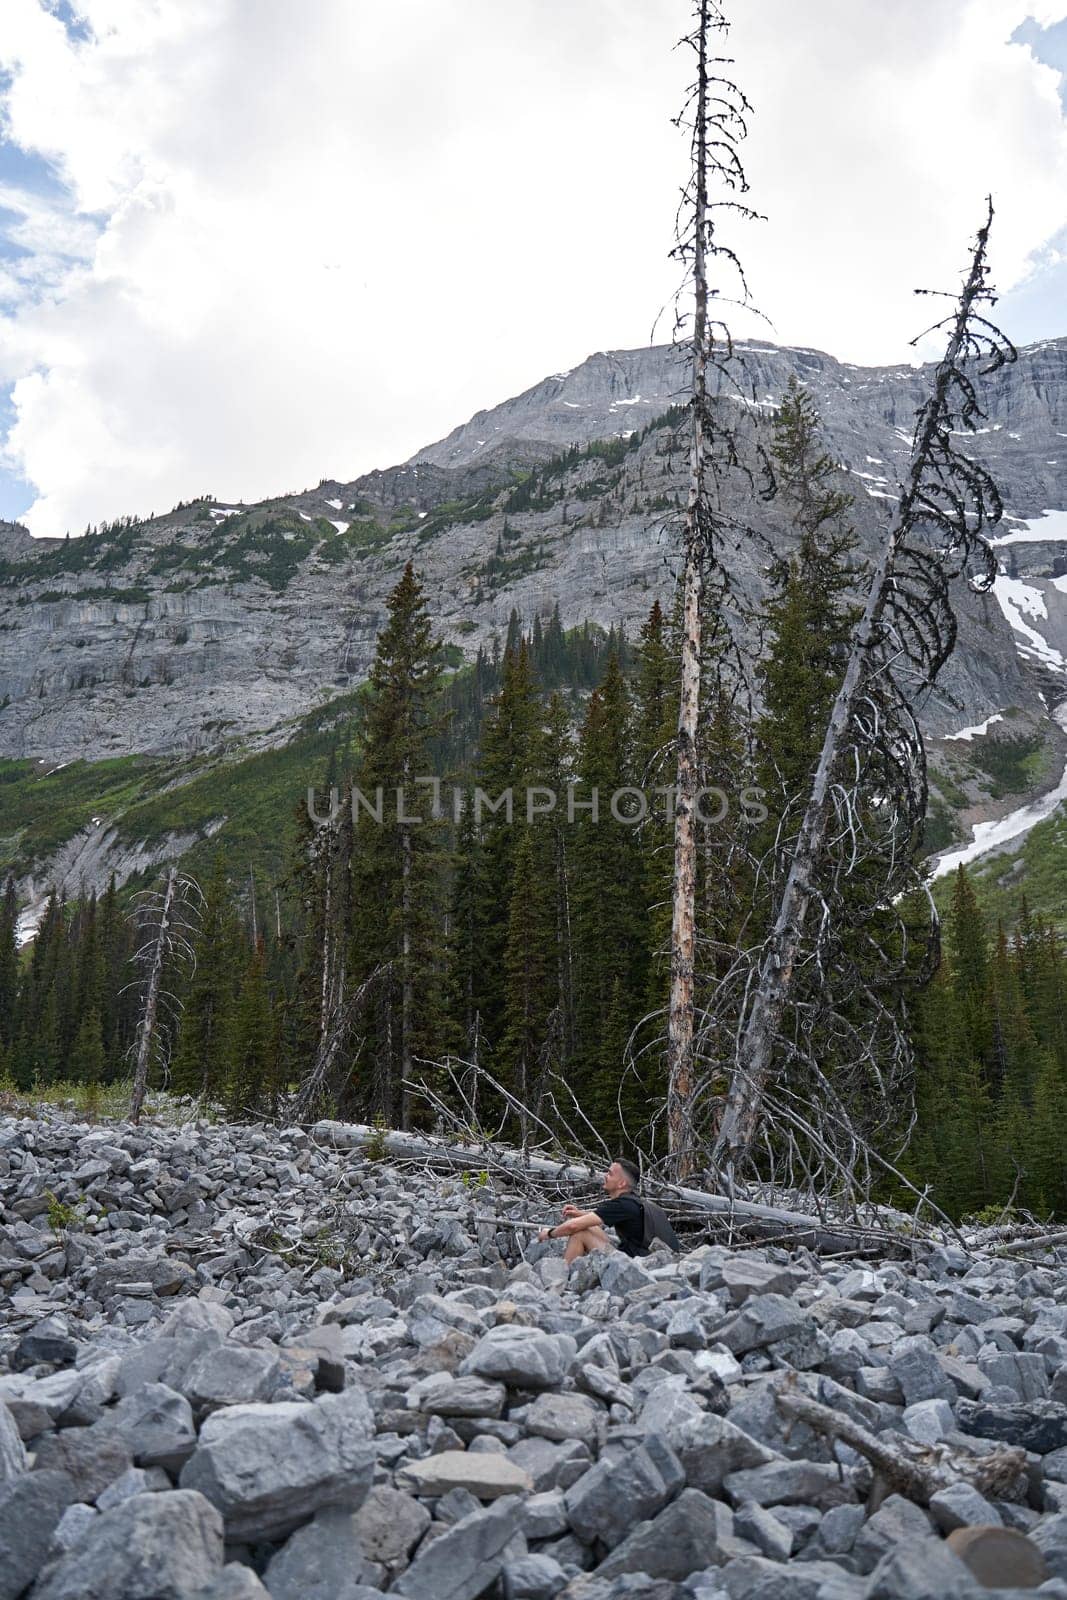 A man sits near the forest on an old dry log around stones after a landslide with a view of rocky mountains. by Try_my_best